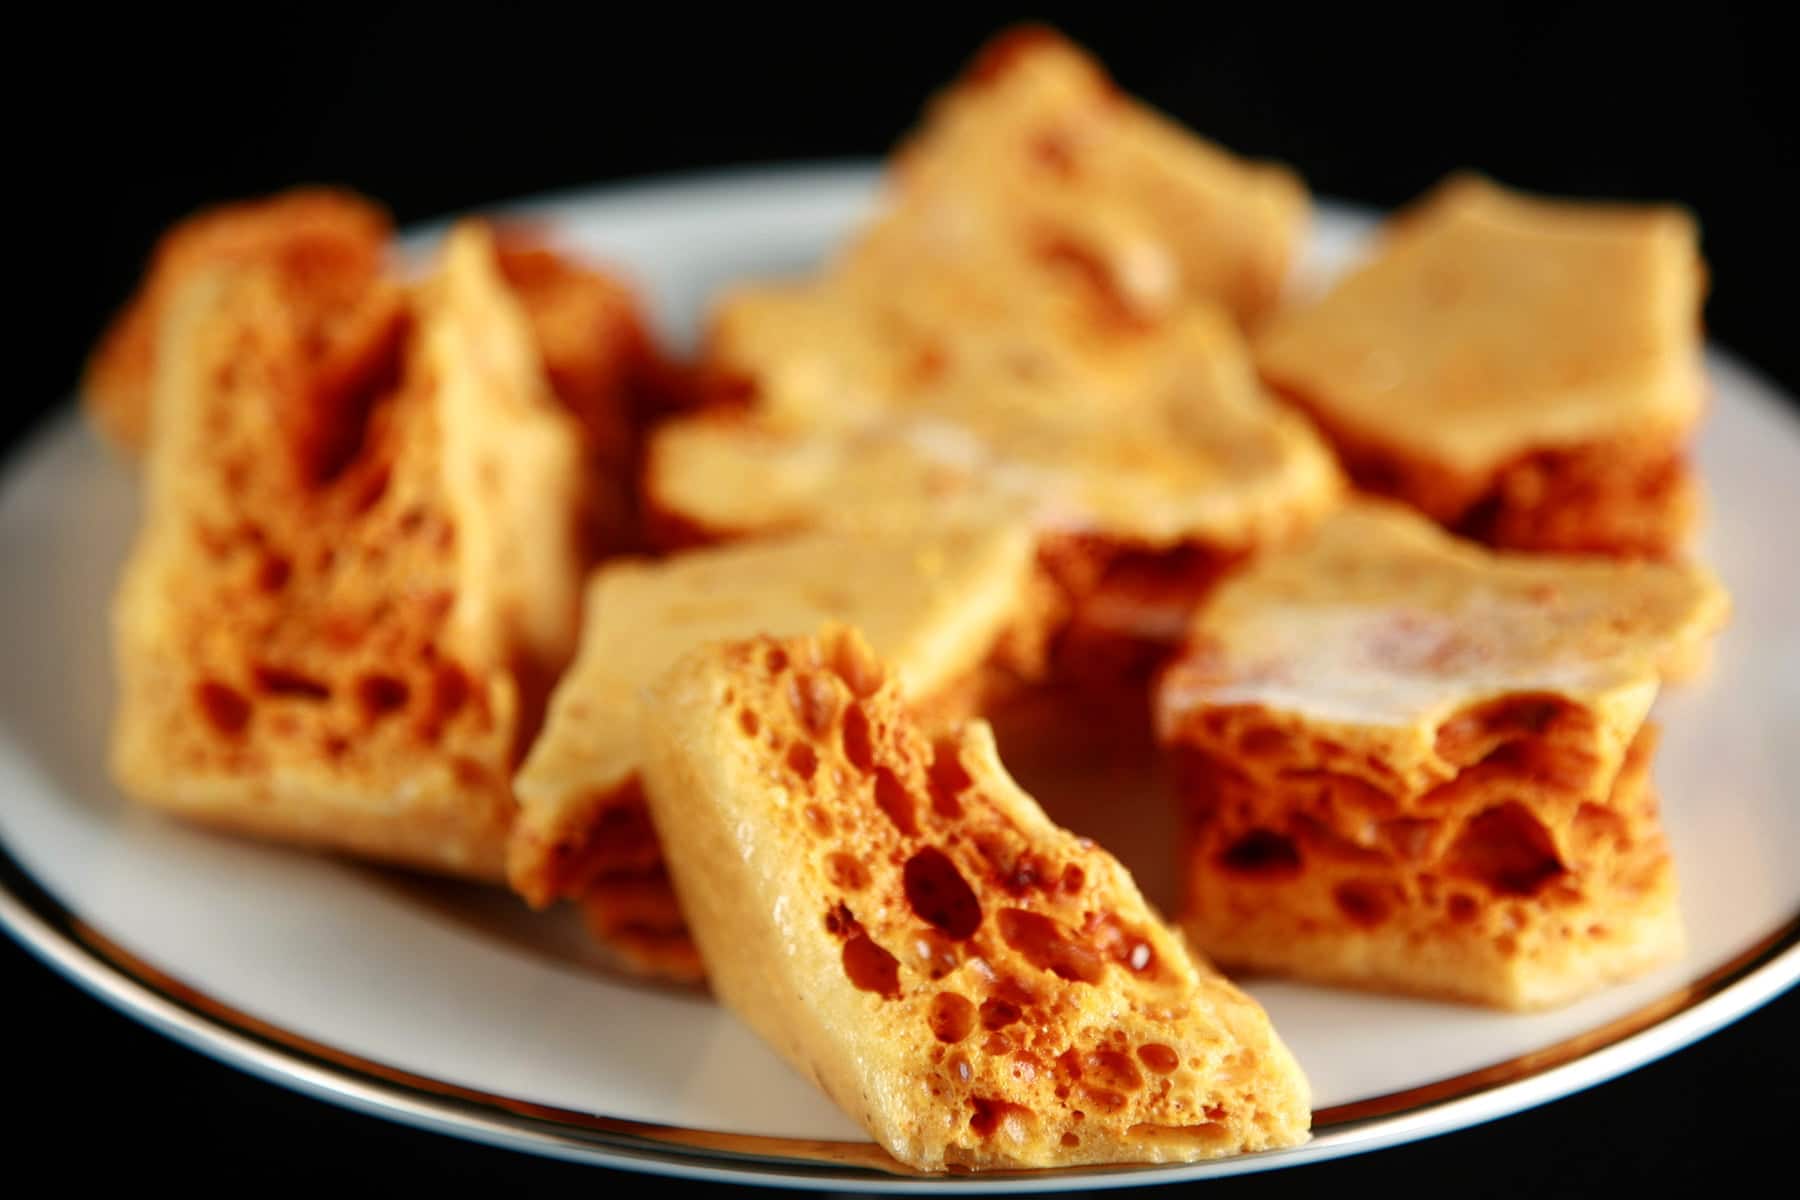 Close up view of a plate of golden honeycomb candy chunks.